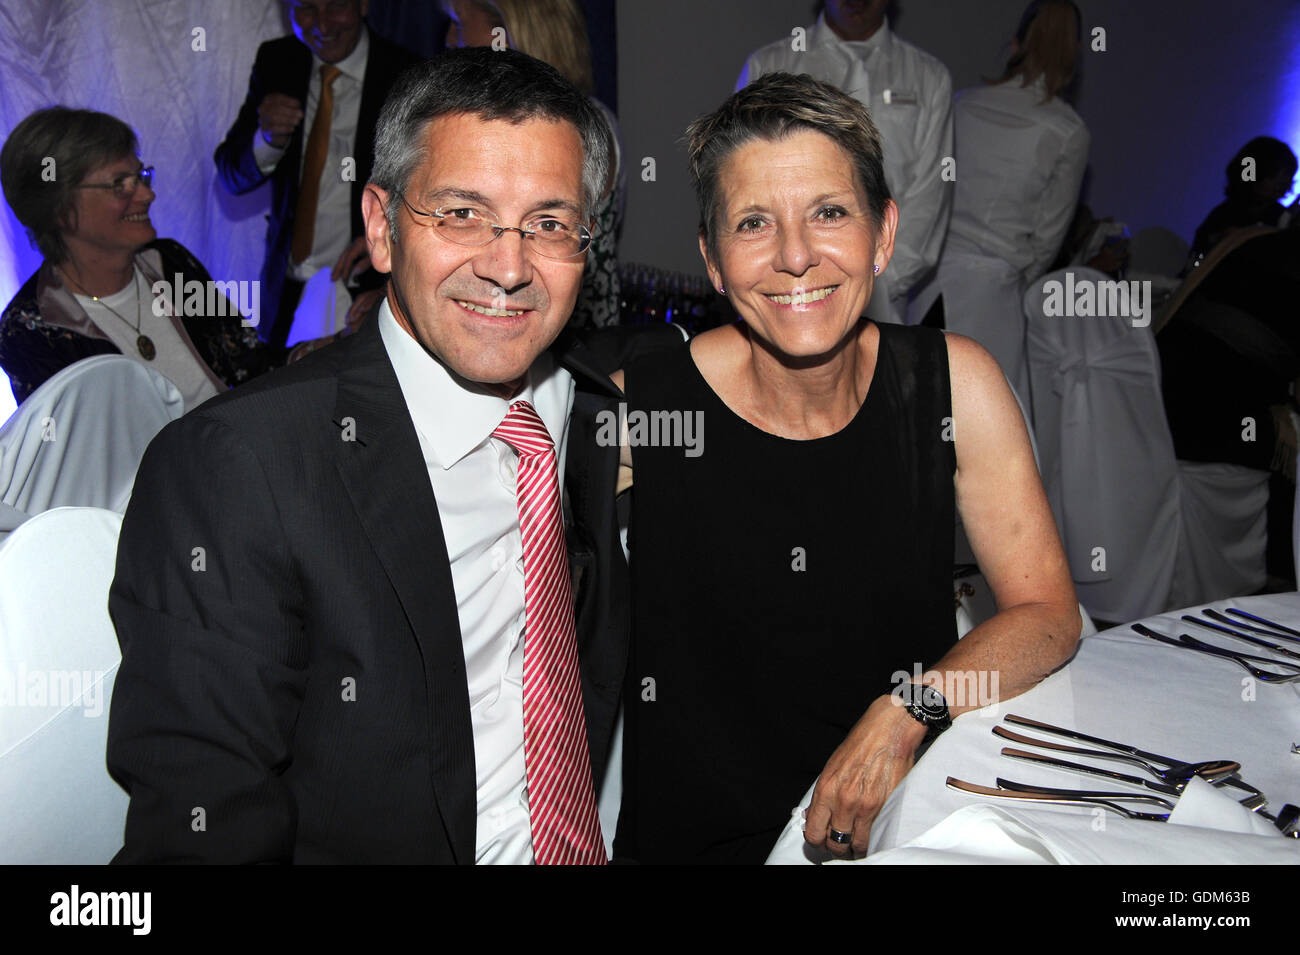 Bad Griesbach, Germany. 16th July, 2016. Herbert Hainer, CEO of Adidas AG  (l) and his wife Angelika enjoying the gala that is being held as part of  the 29th Kaiser Cup golf